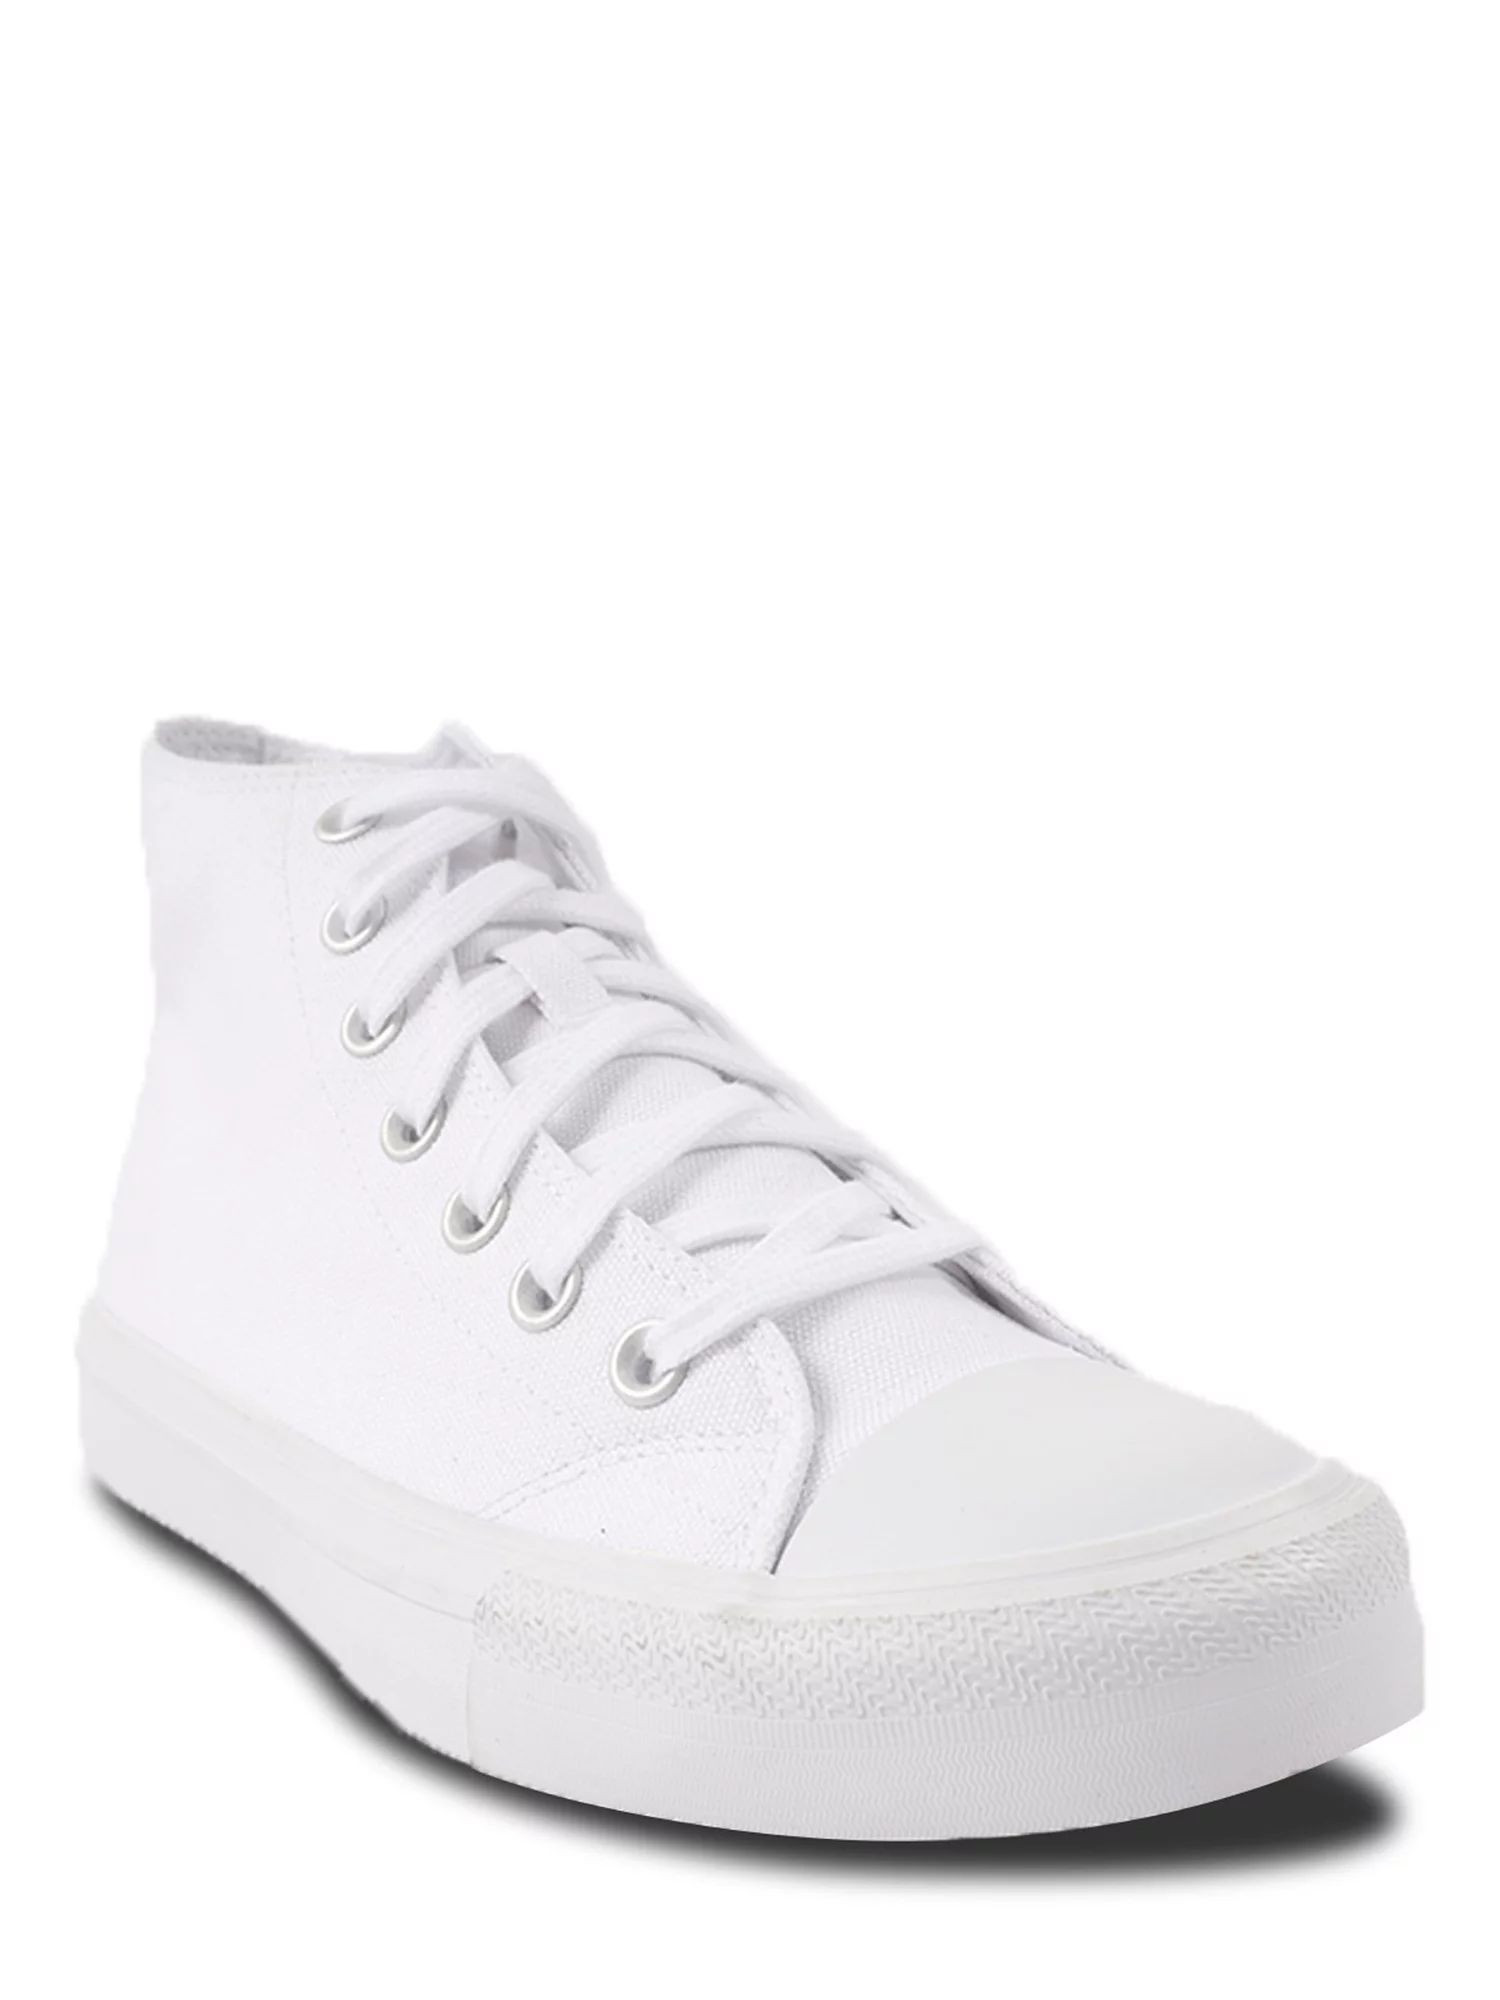 No Boundaries Women's High Top Canvas Casual Shoes (Wide Width Available) | Walmart (US)